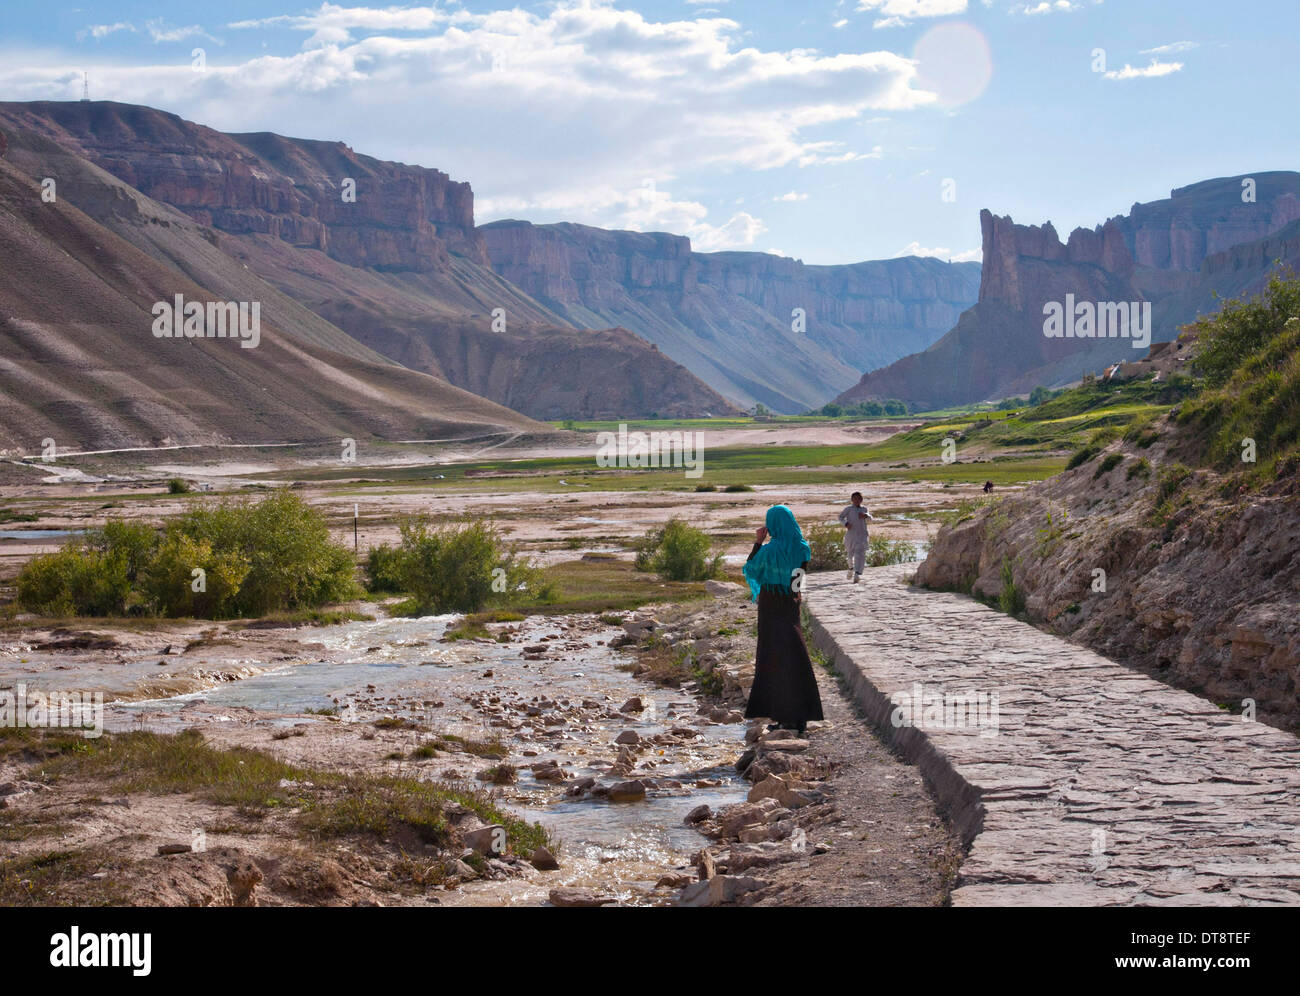 Afghan visitors at the Band-e-Amir National Park view the scenery June 27, 2012 in Bamyan, Afghanistan. Stock Photo